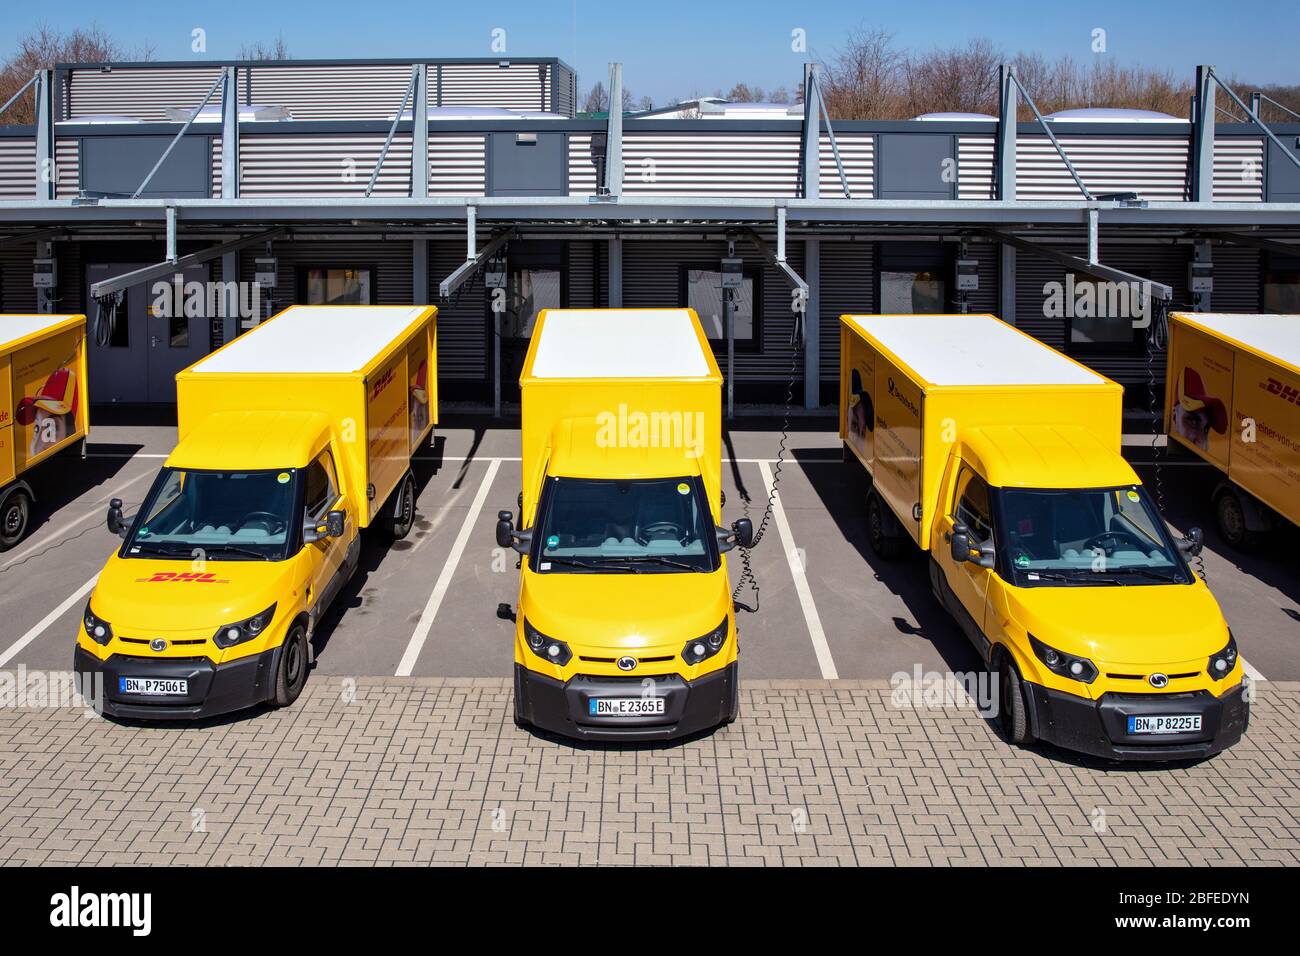 StreetScooter Work at Deutsche Post DHL depot. Stock Photo